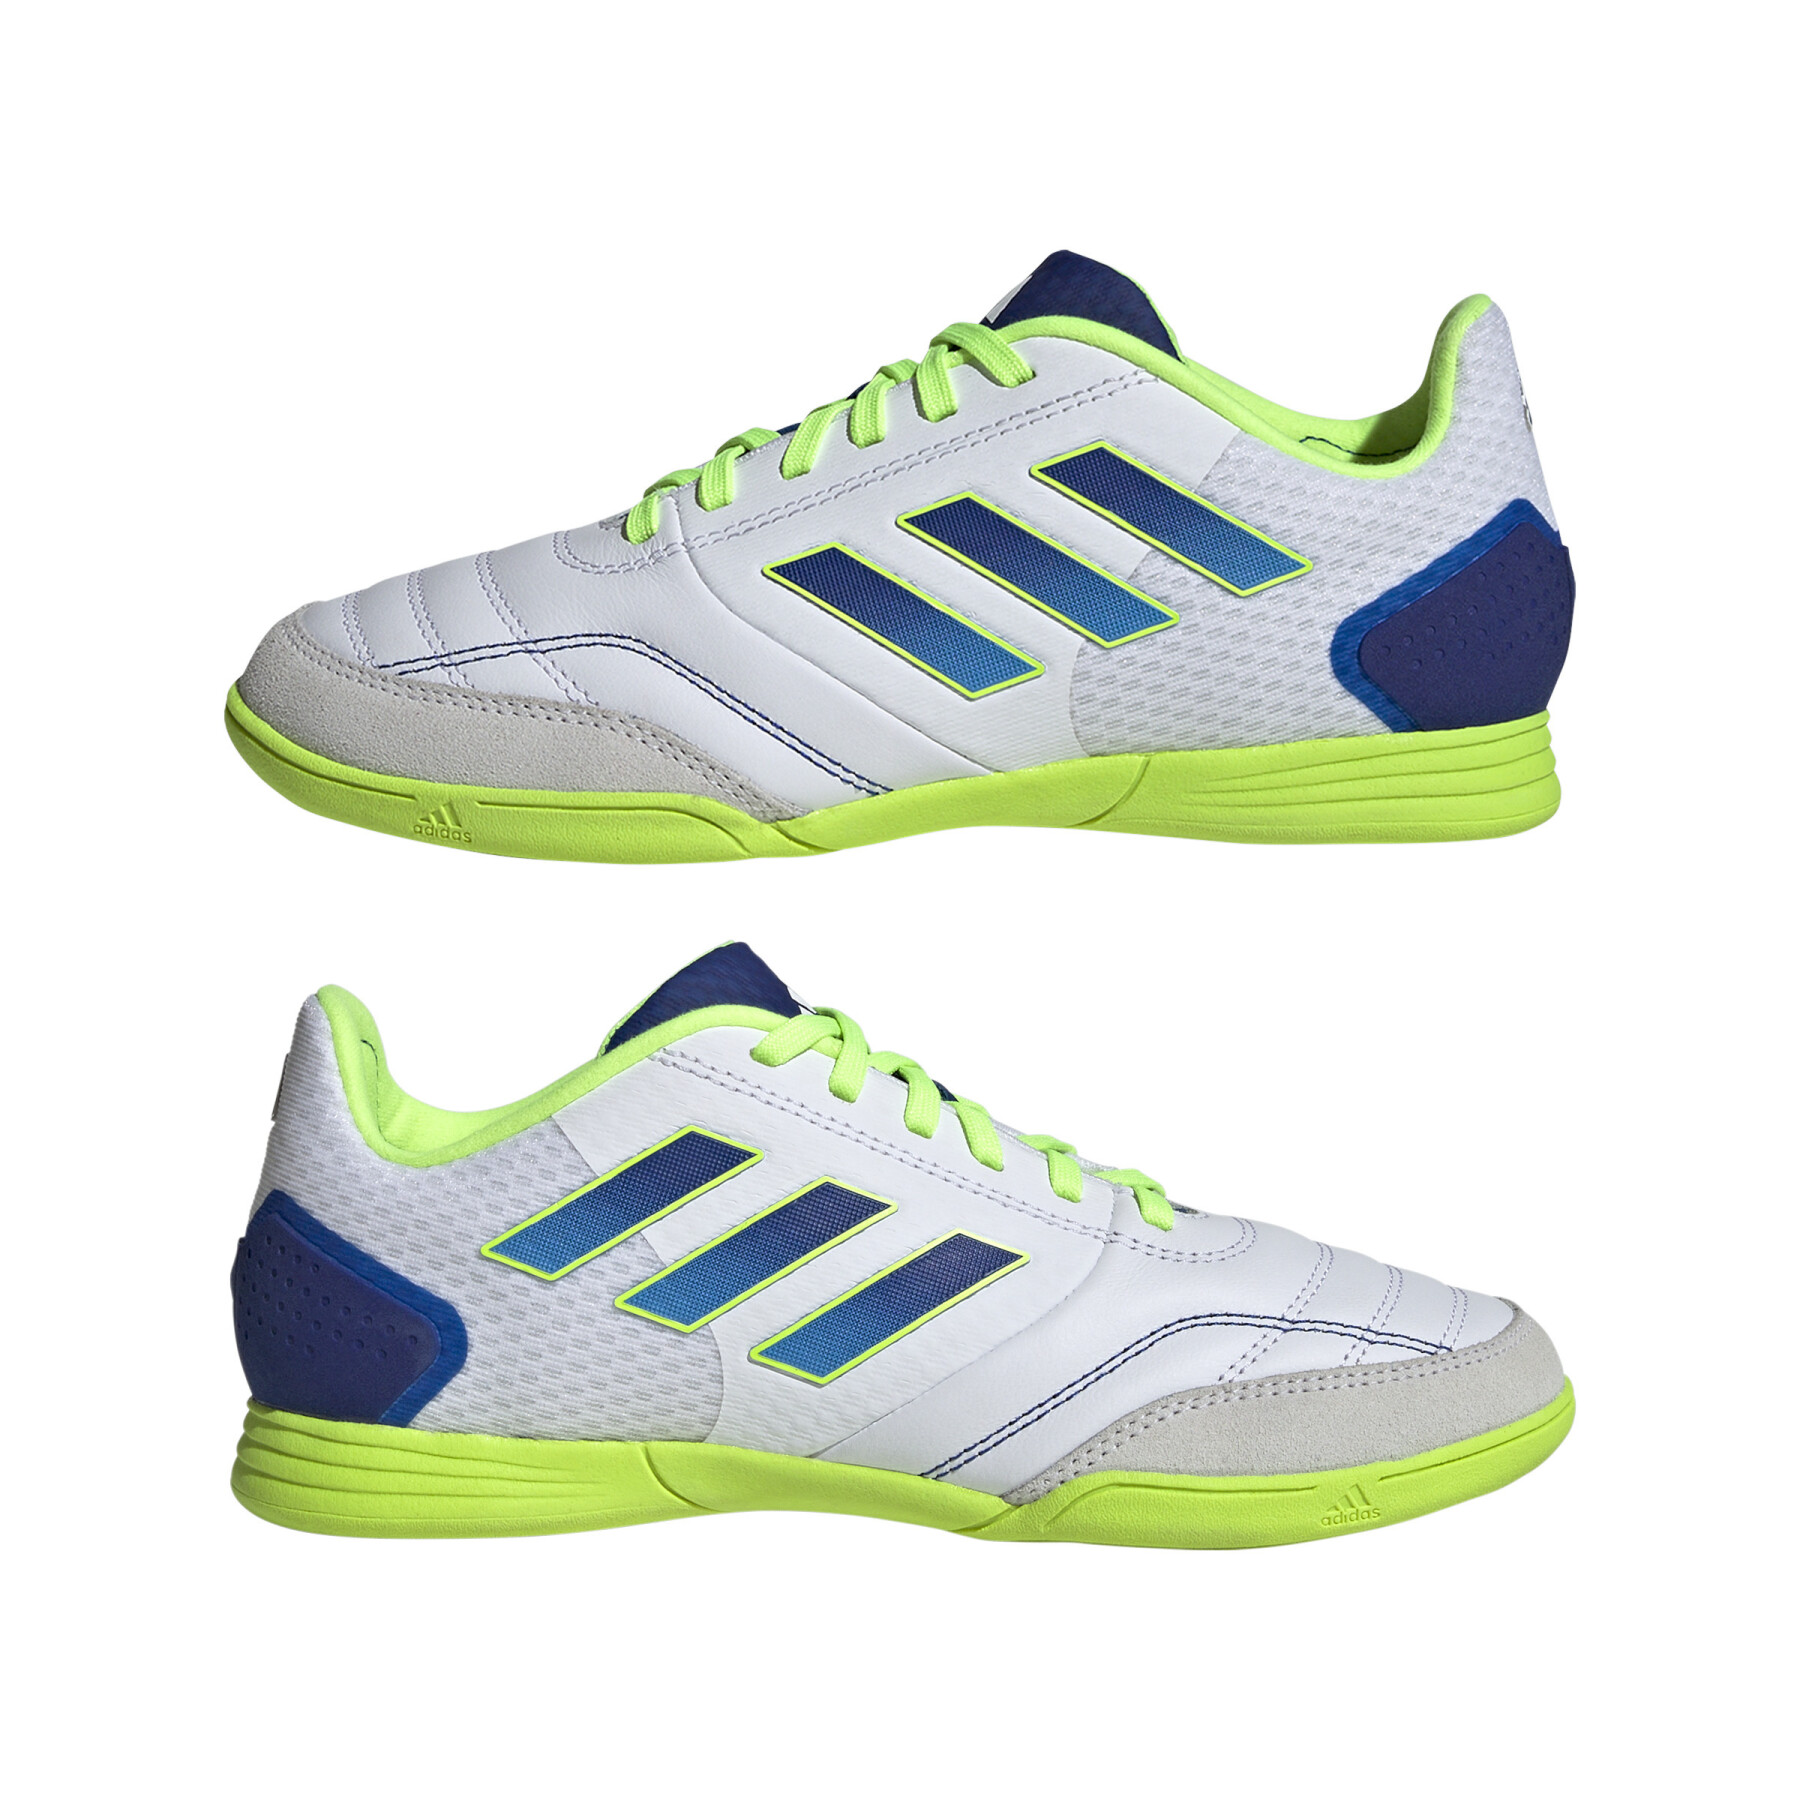 Chaussures de football enfant adidas Top Sala Competition Indoor